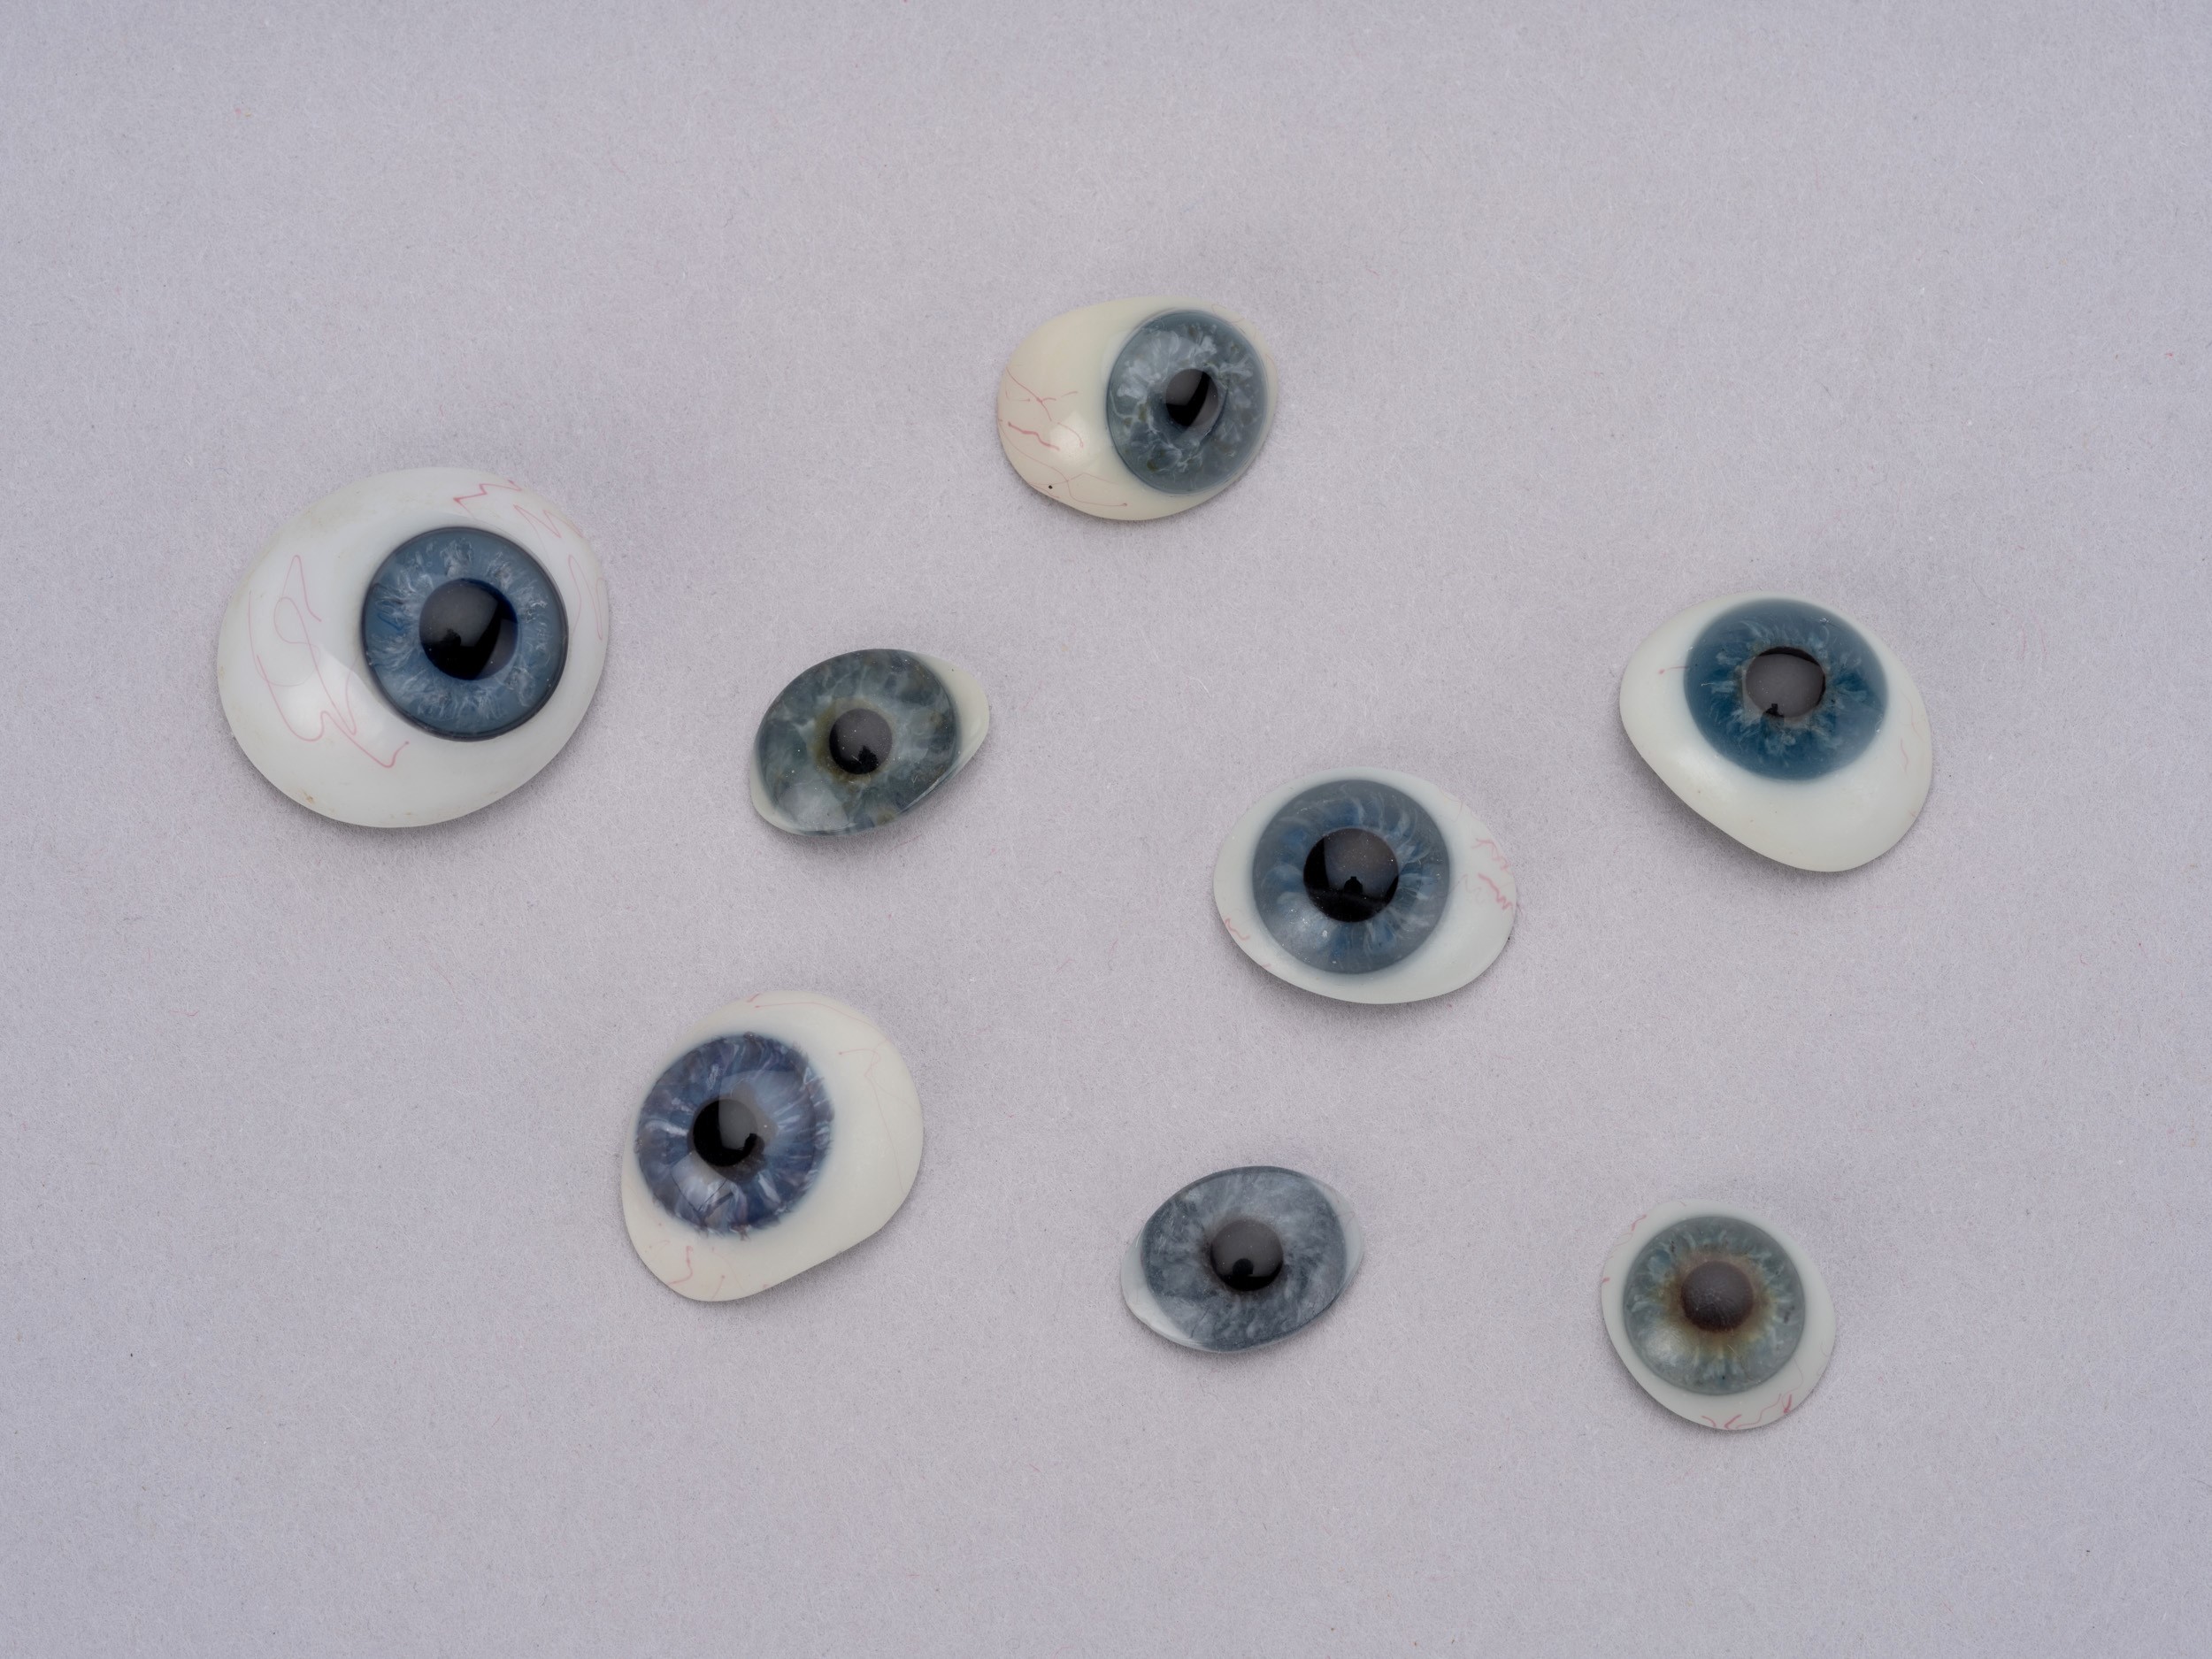 Artificial glass eyes on display at the George Marshall Medical Museum